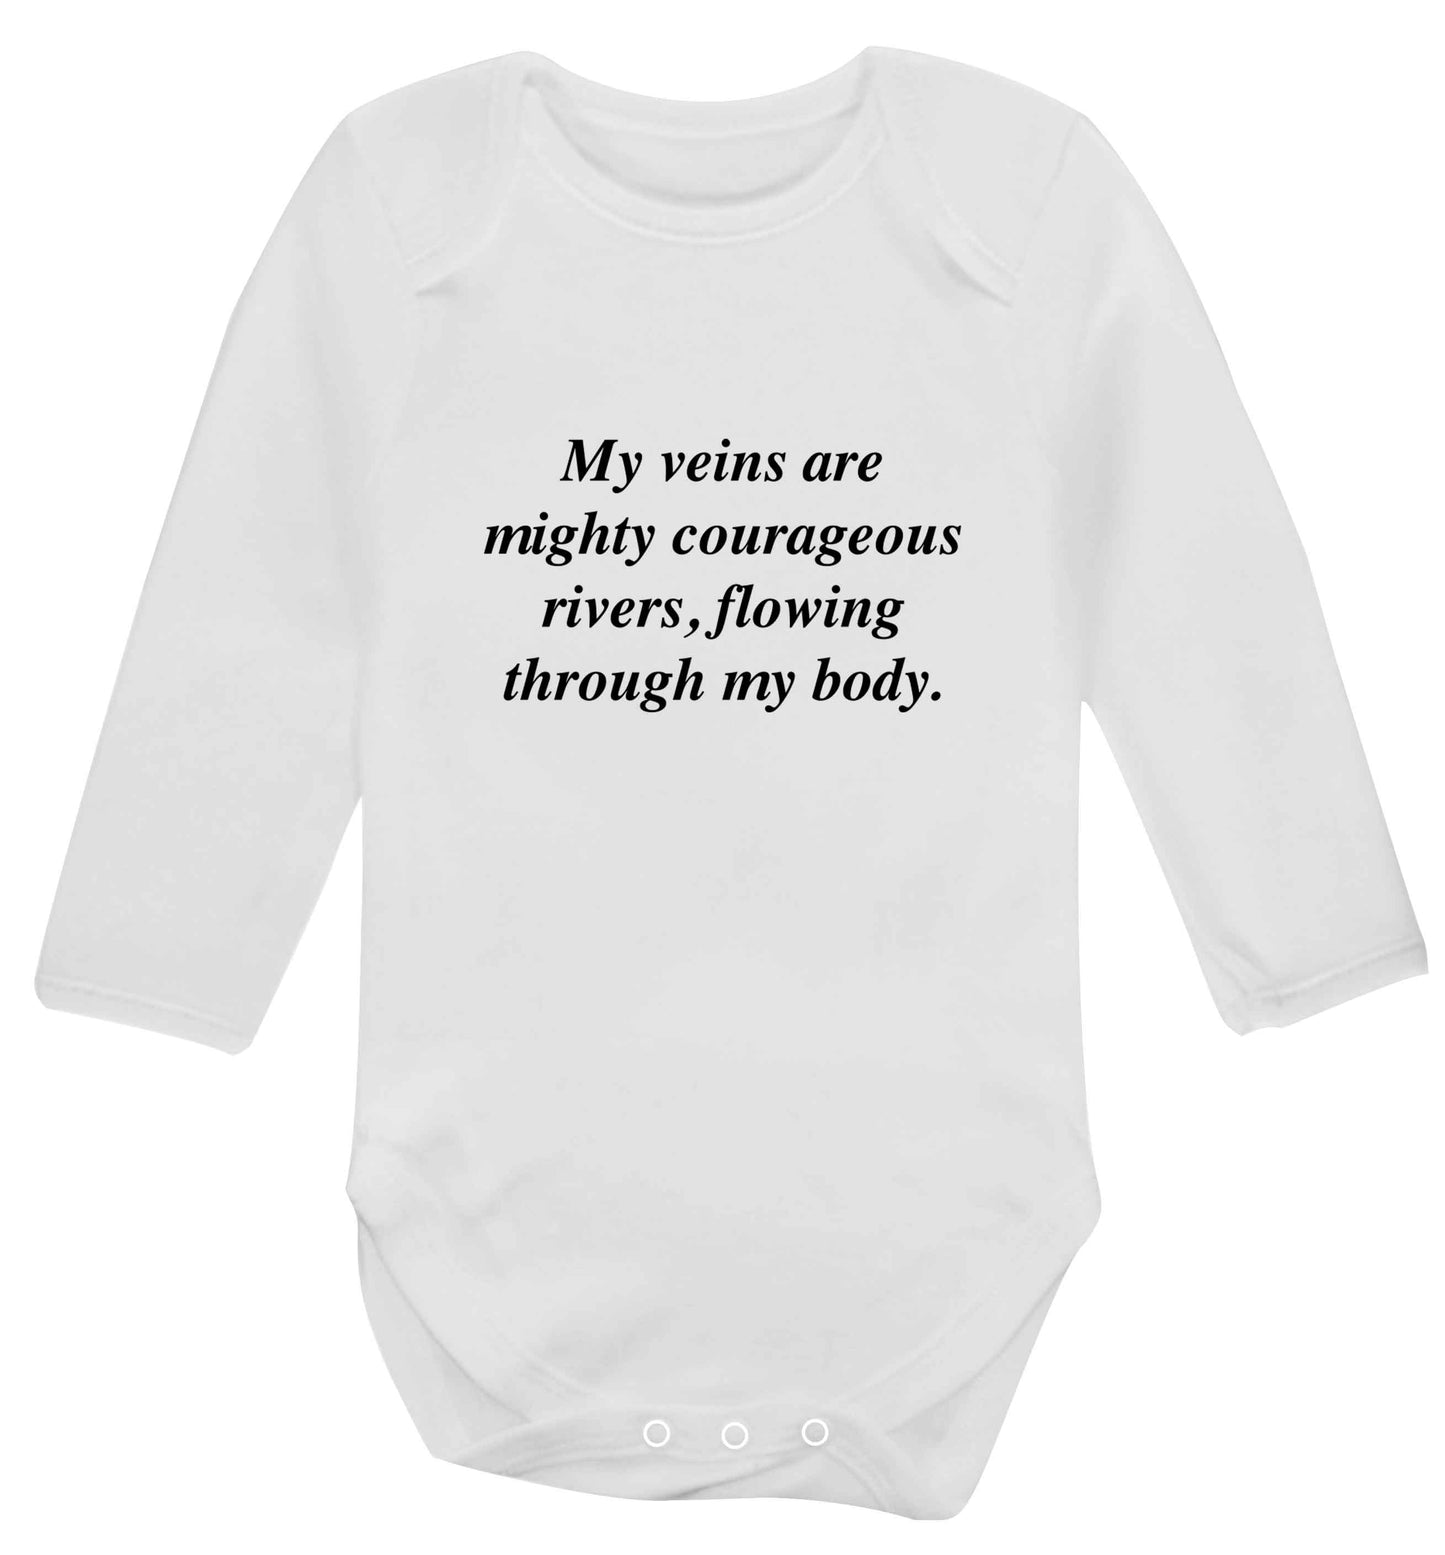 My veins are mighty courageous rivers, flowing through my body baby vest long sleeved white 6-12 months